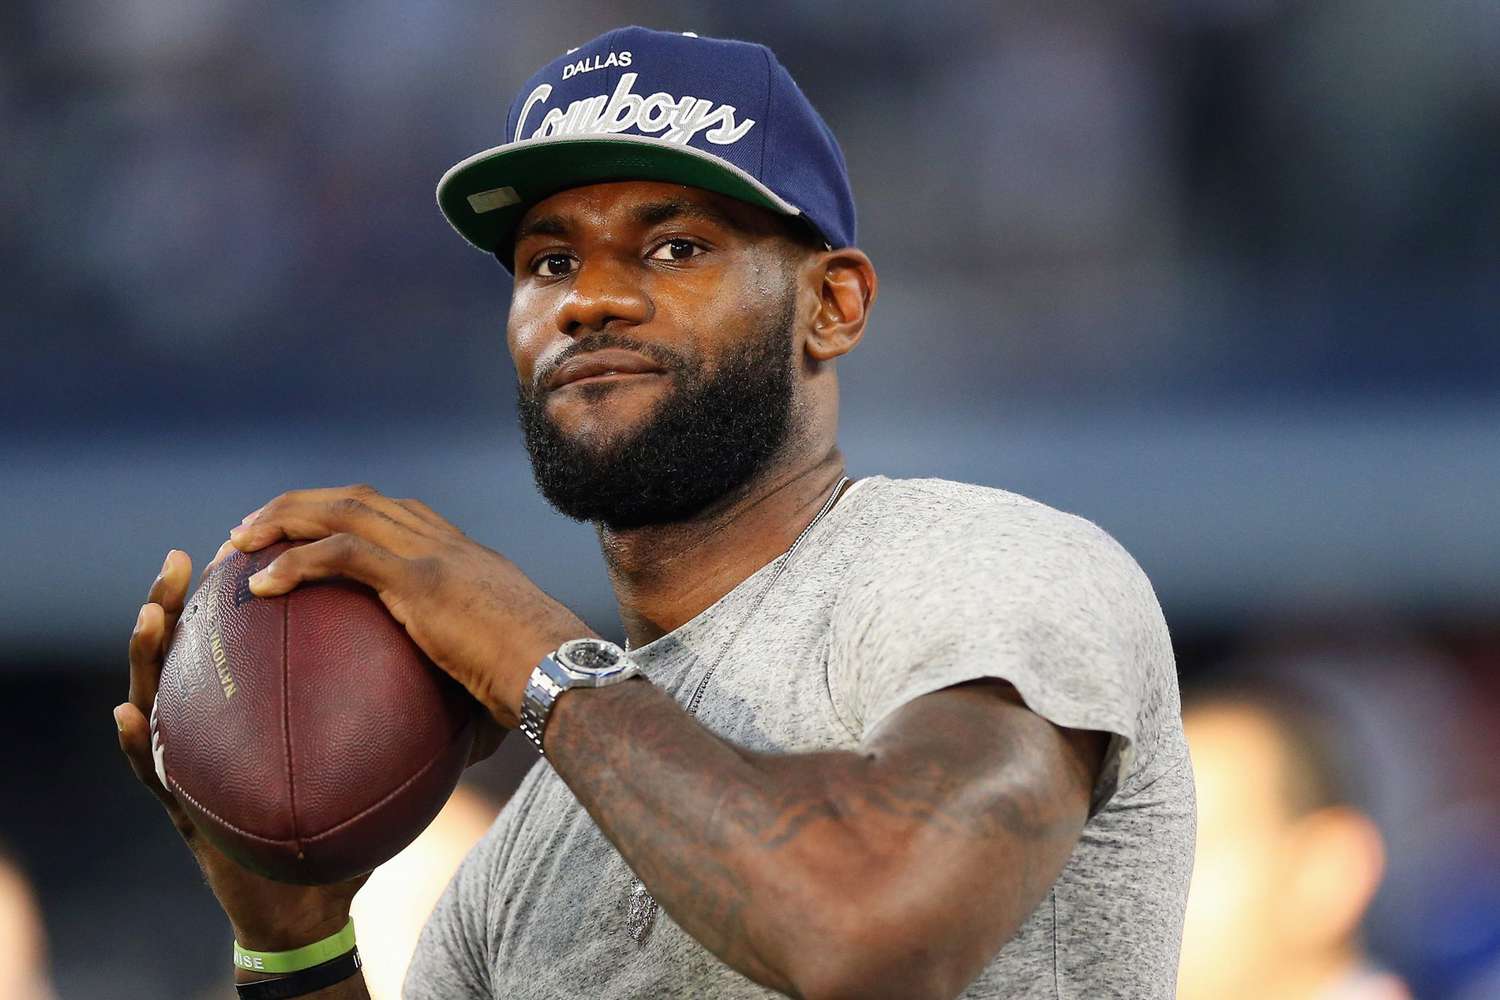 LeBron James on Chance to Play in NFL